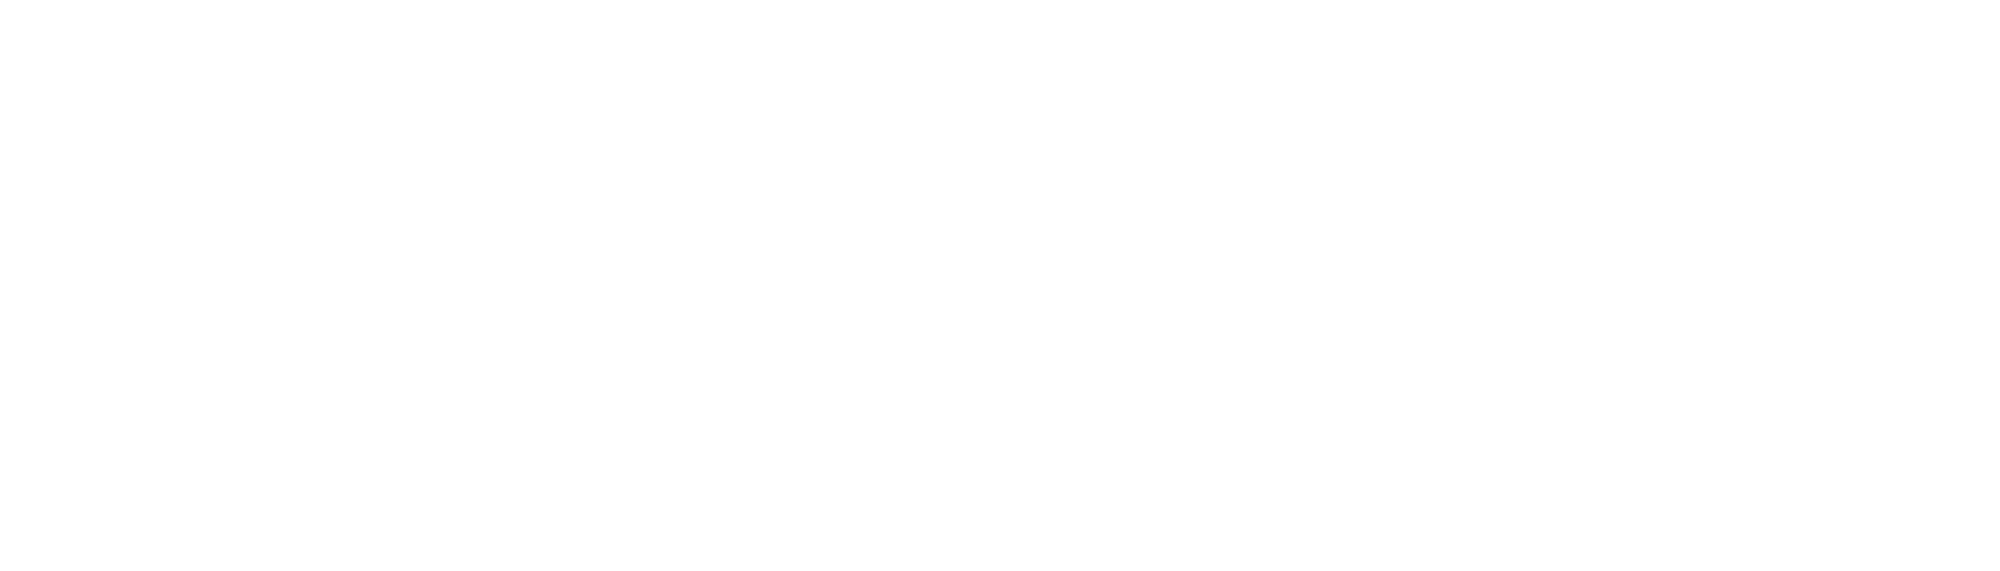 Aerfort Dhún na nGall logo in white with no background,